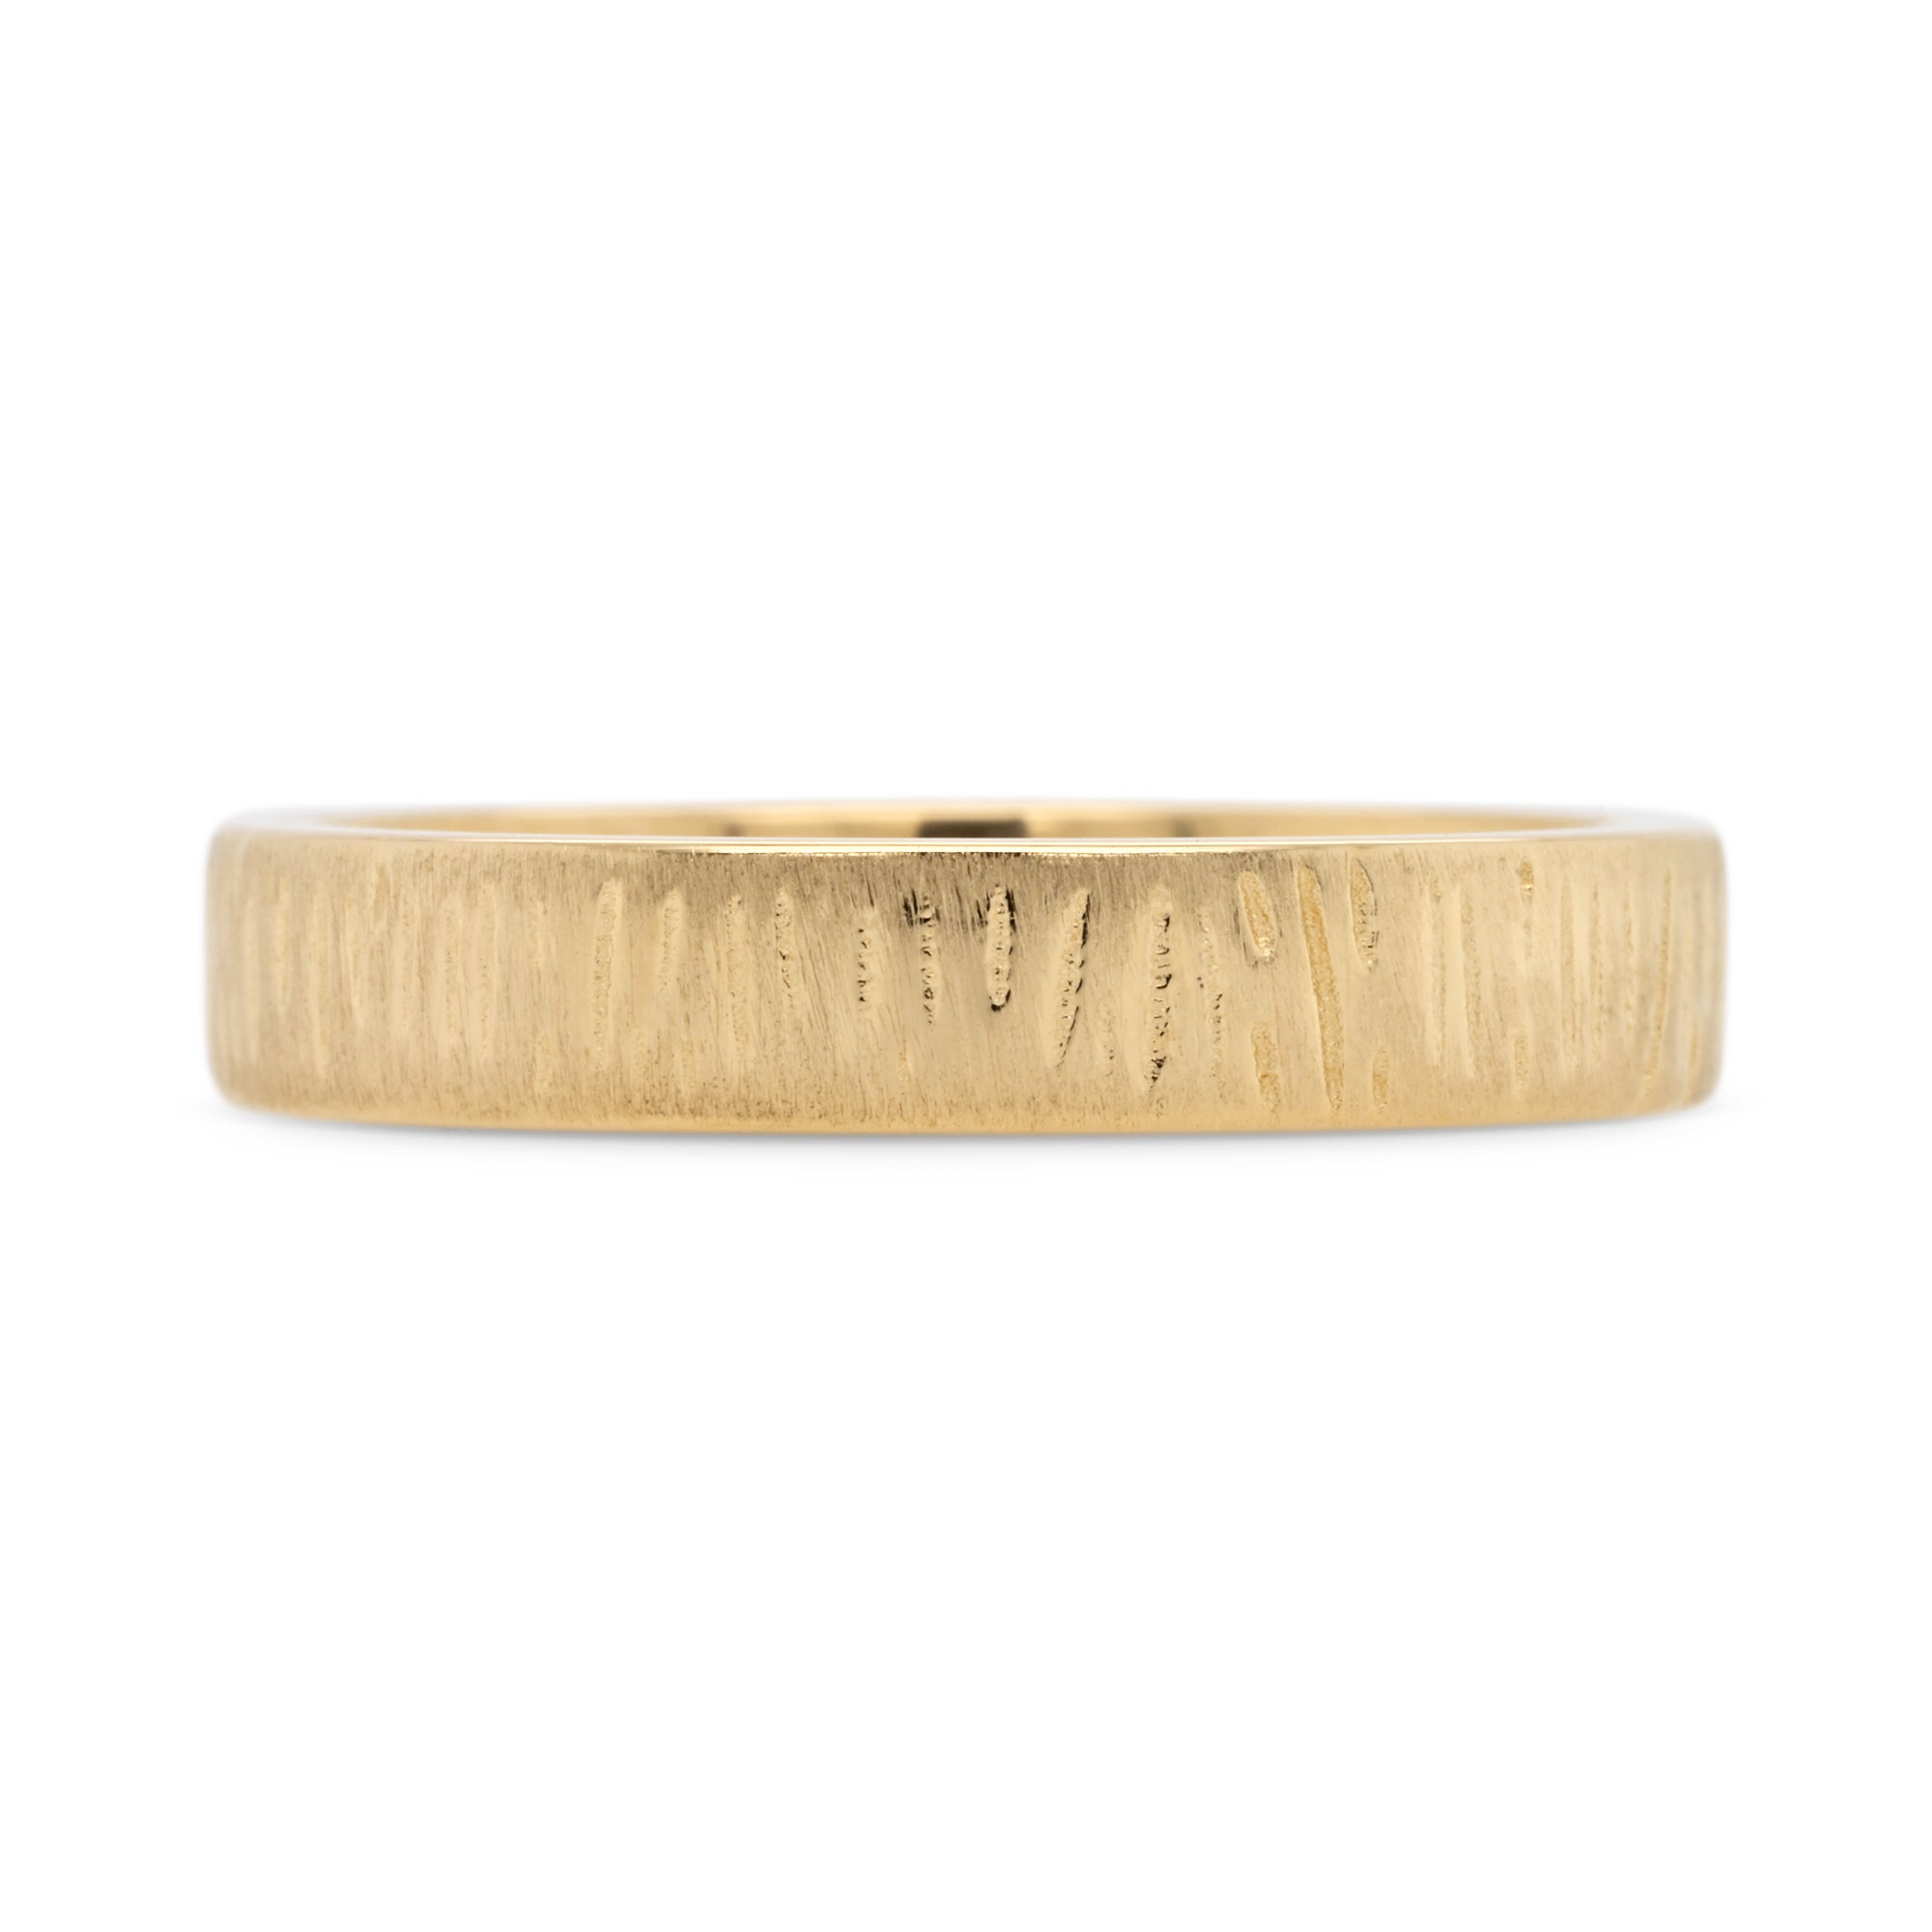 4mm yellow gold wedding band with carved woodgrain texture